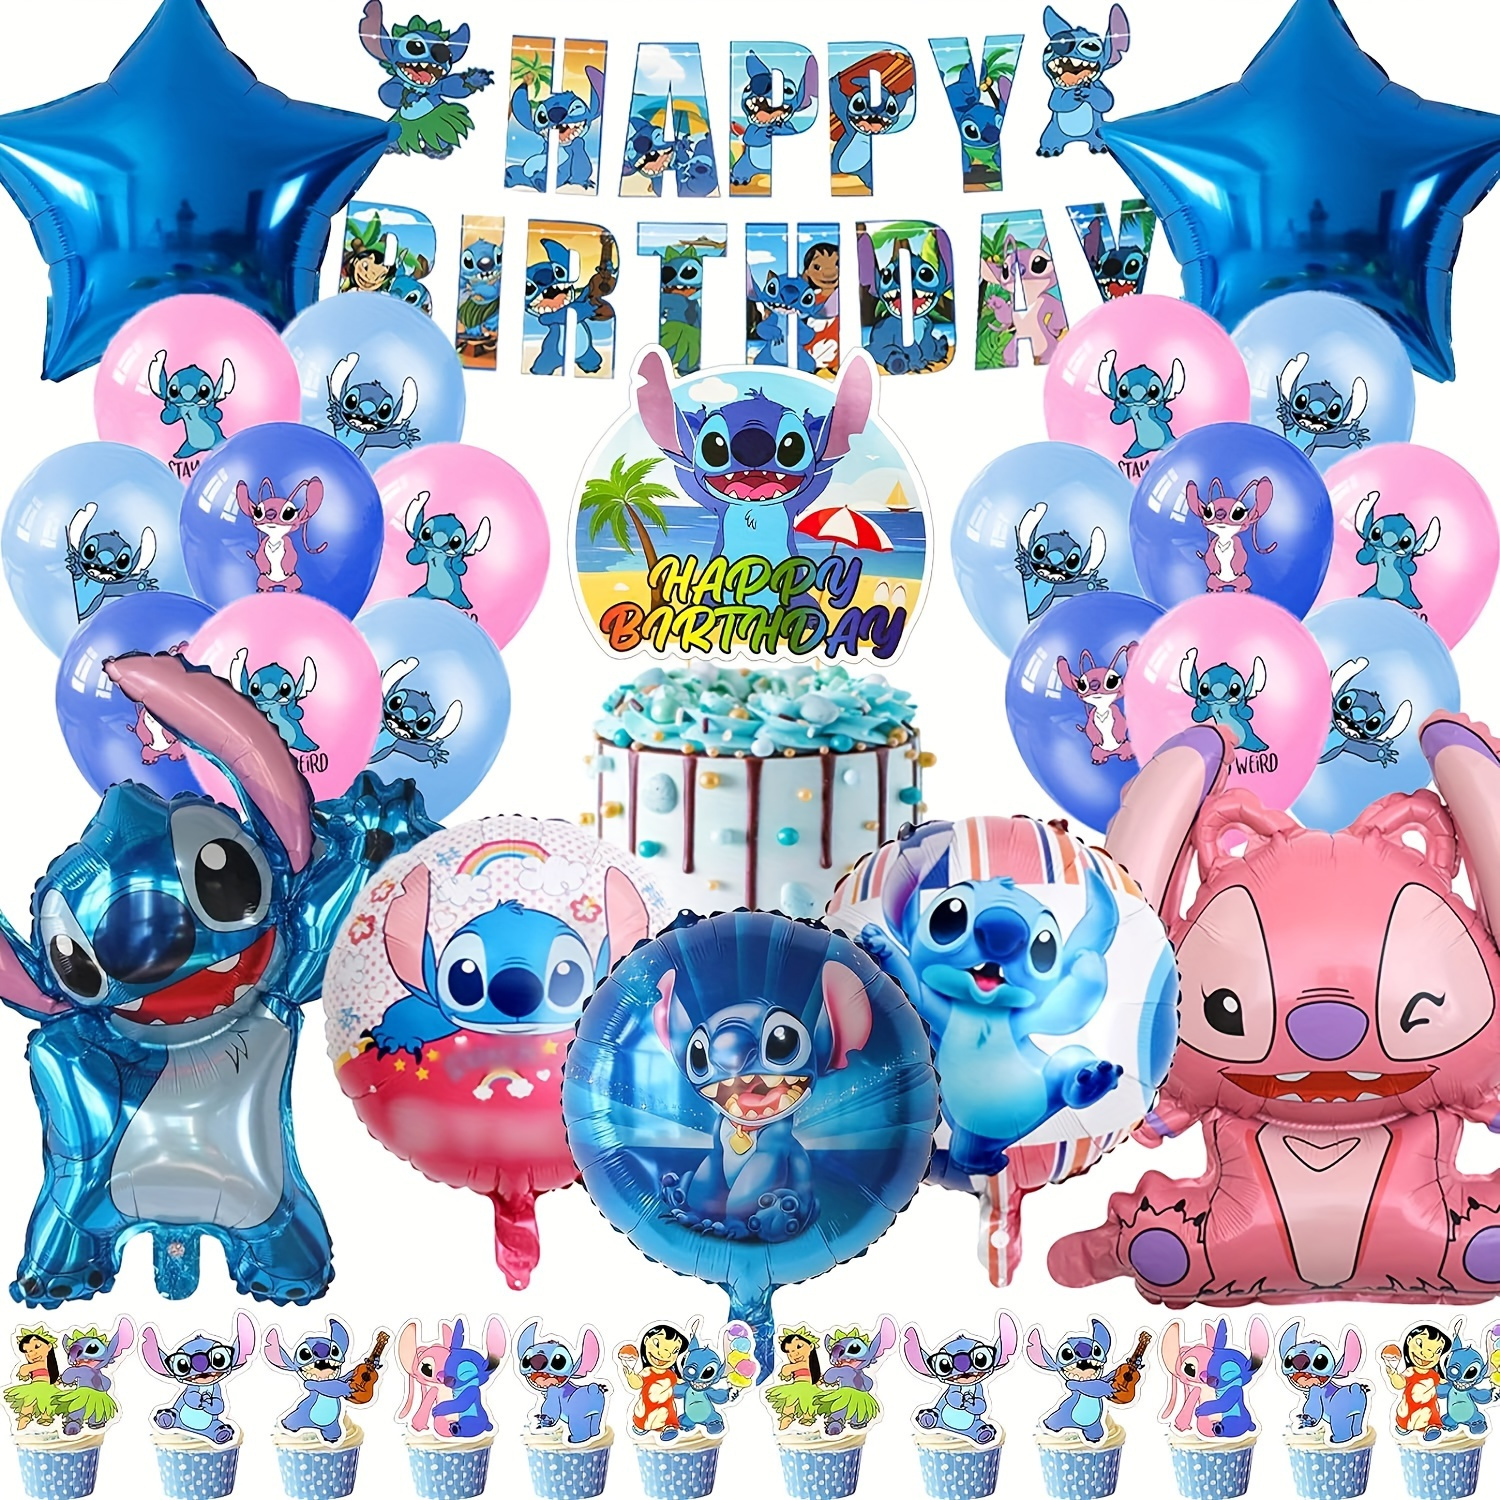 

Disney Stitch & Friends Birthday Party Kit - Aluminum Foil Balloons, Interstellar Theme Banner, Cake Topper & Spiral Charms - Perfect For Home Decor & Celebrations